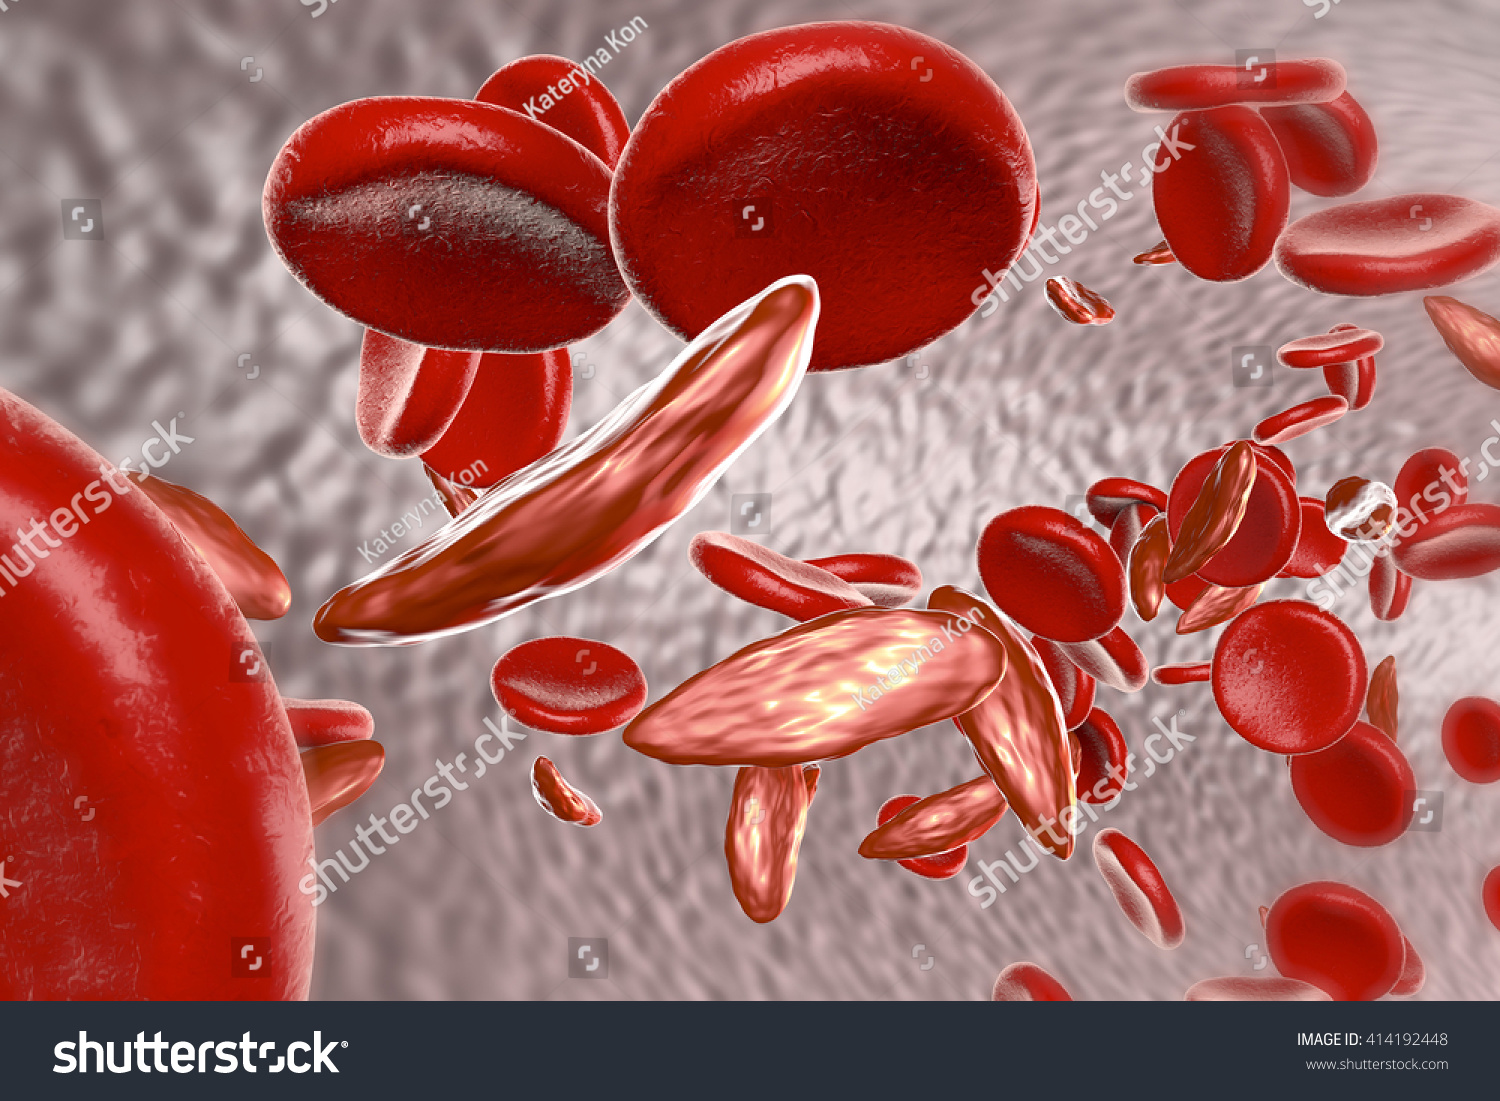 Sickle Cell Anemia 3d Illustration Showing Stock Illustration 414192448 4716